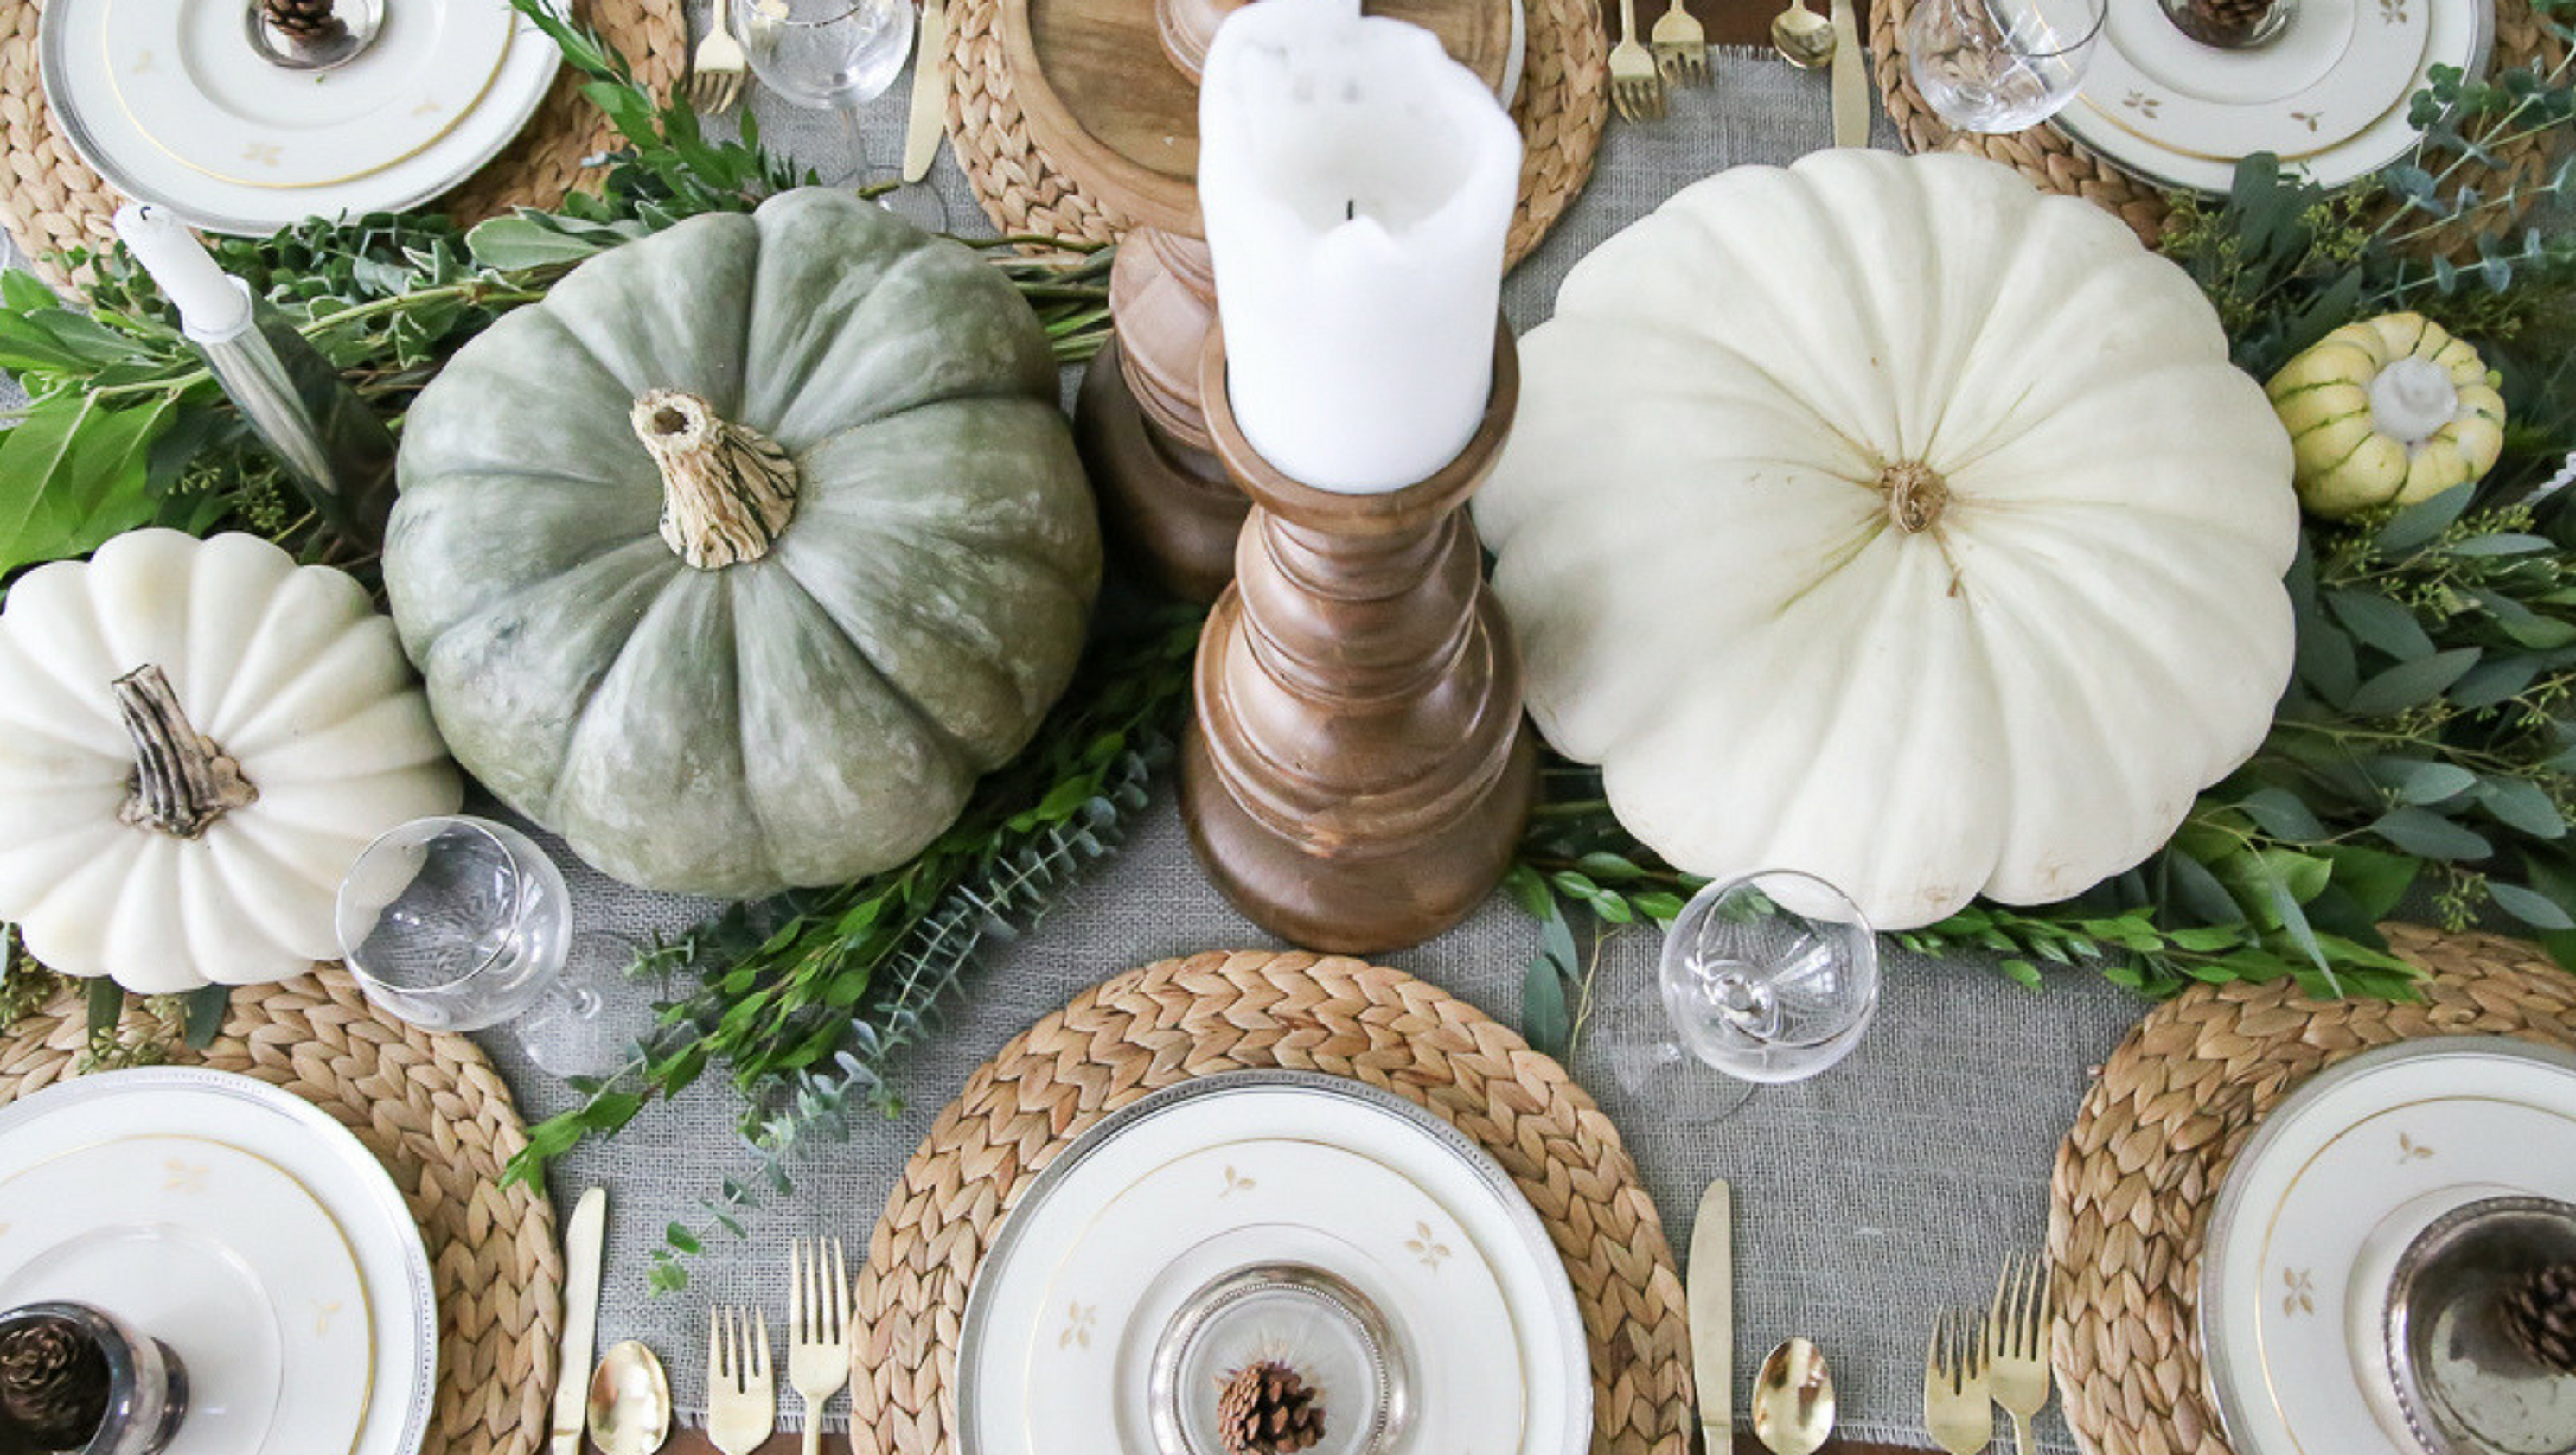 The 10 most popular Thanksgiving trends for 2017